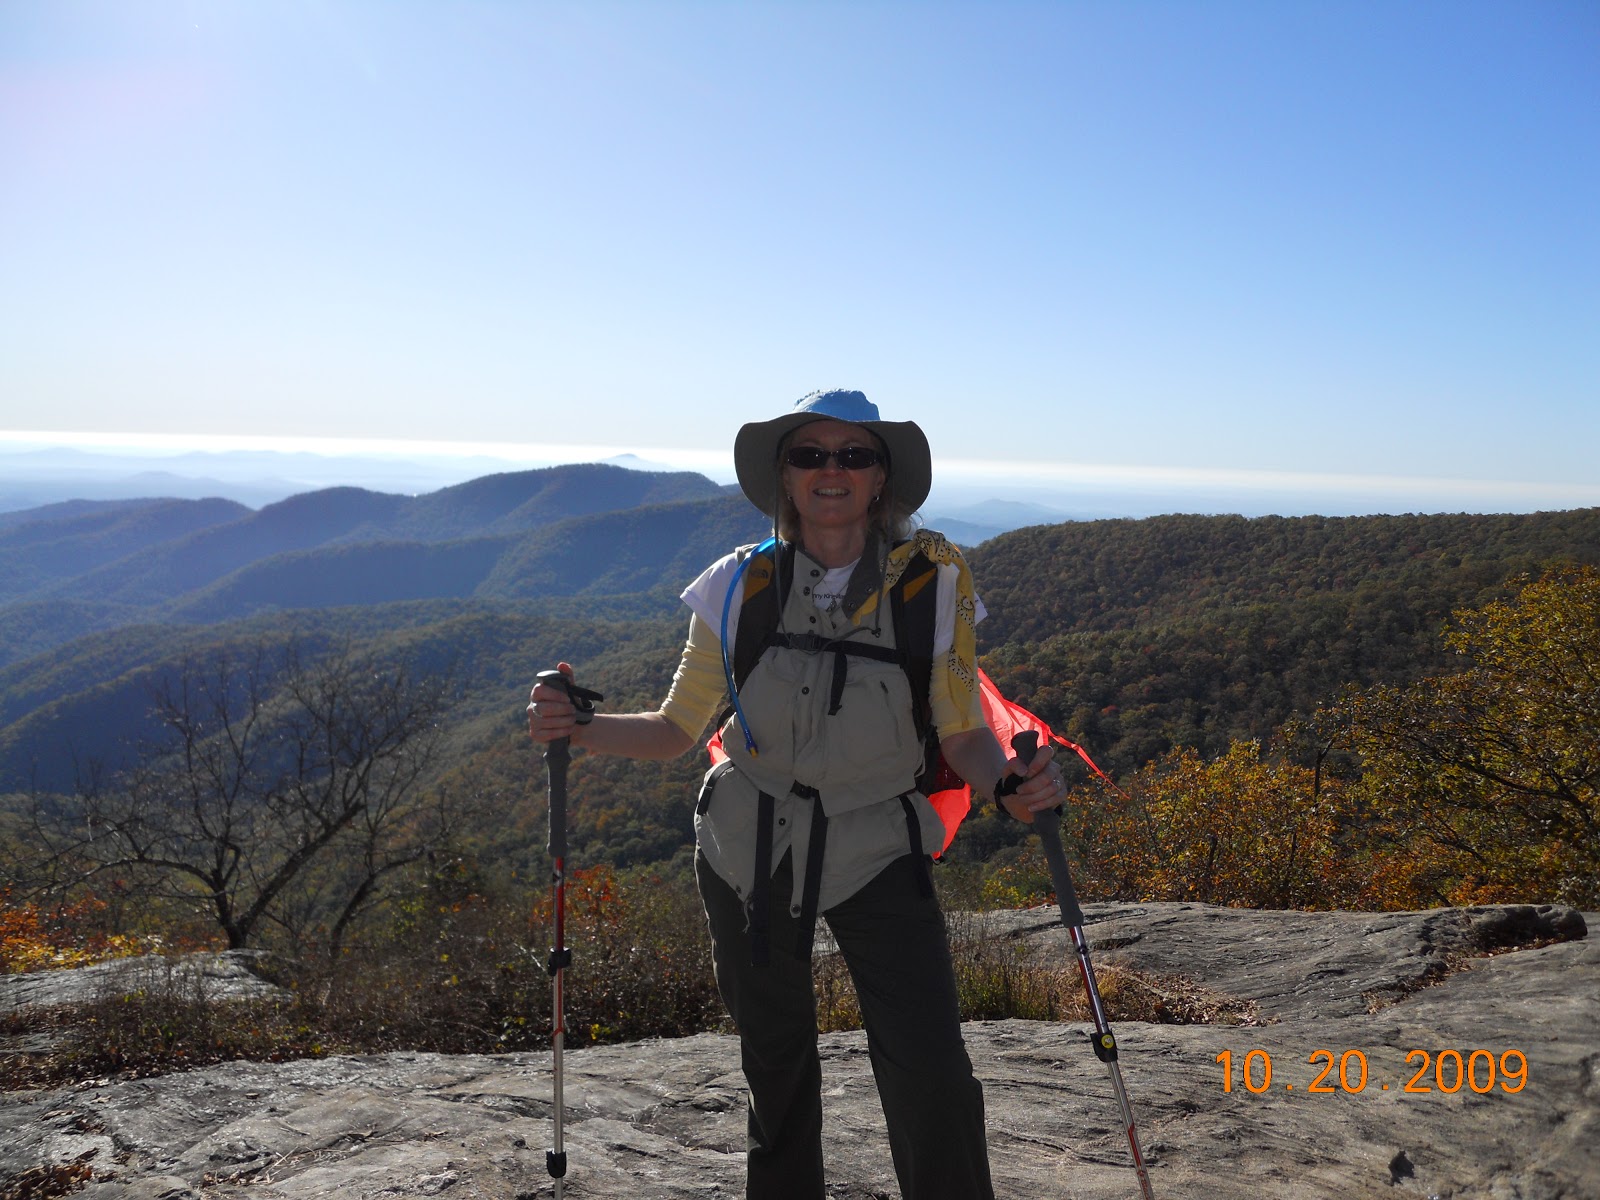 Working to live: Don't you wish your girlfriend was a hiker like me ...